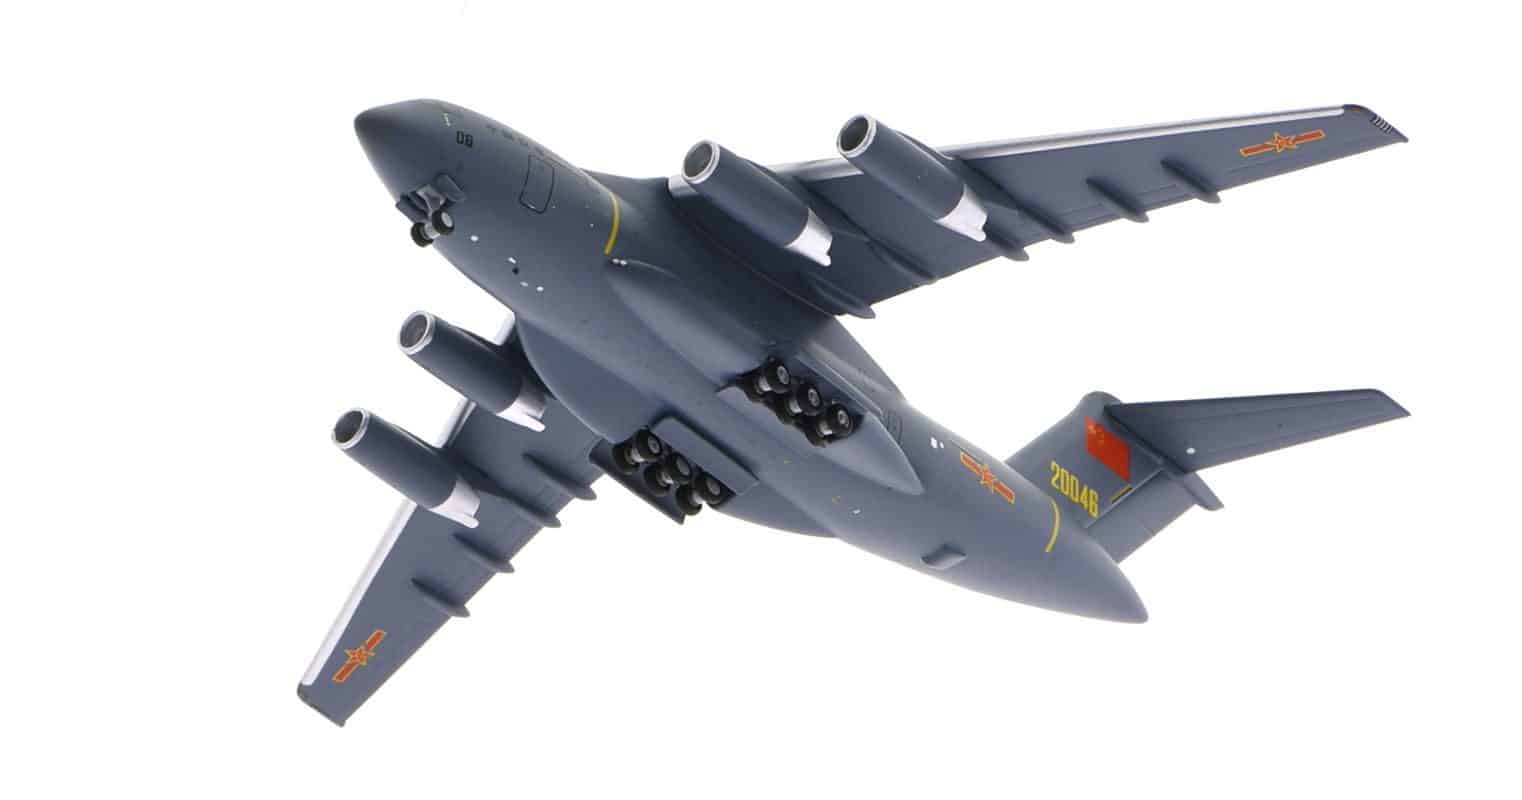 Underside view of NG Models NG22017 - 1/400 scale diecast model of the Xi'an Y-20A Kunpeng, s/n 20046 of the PLAAF